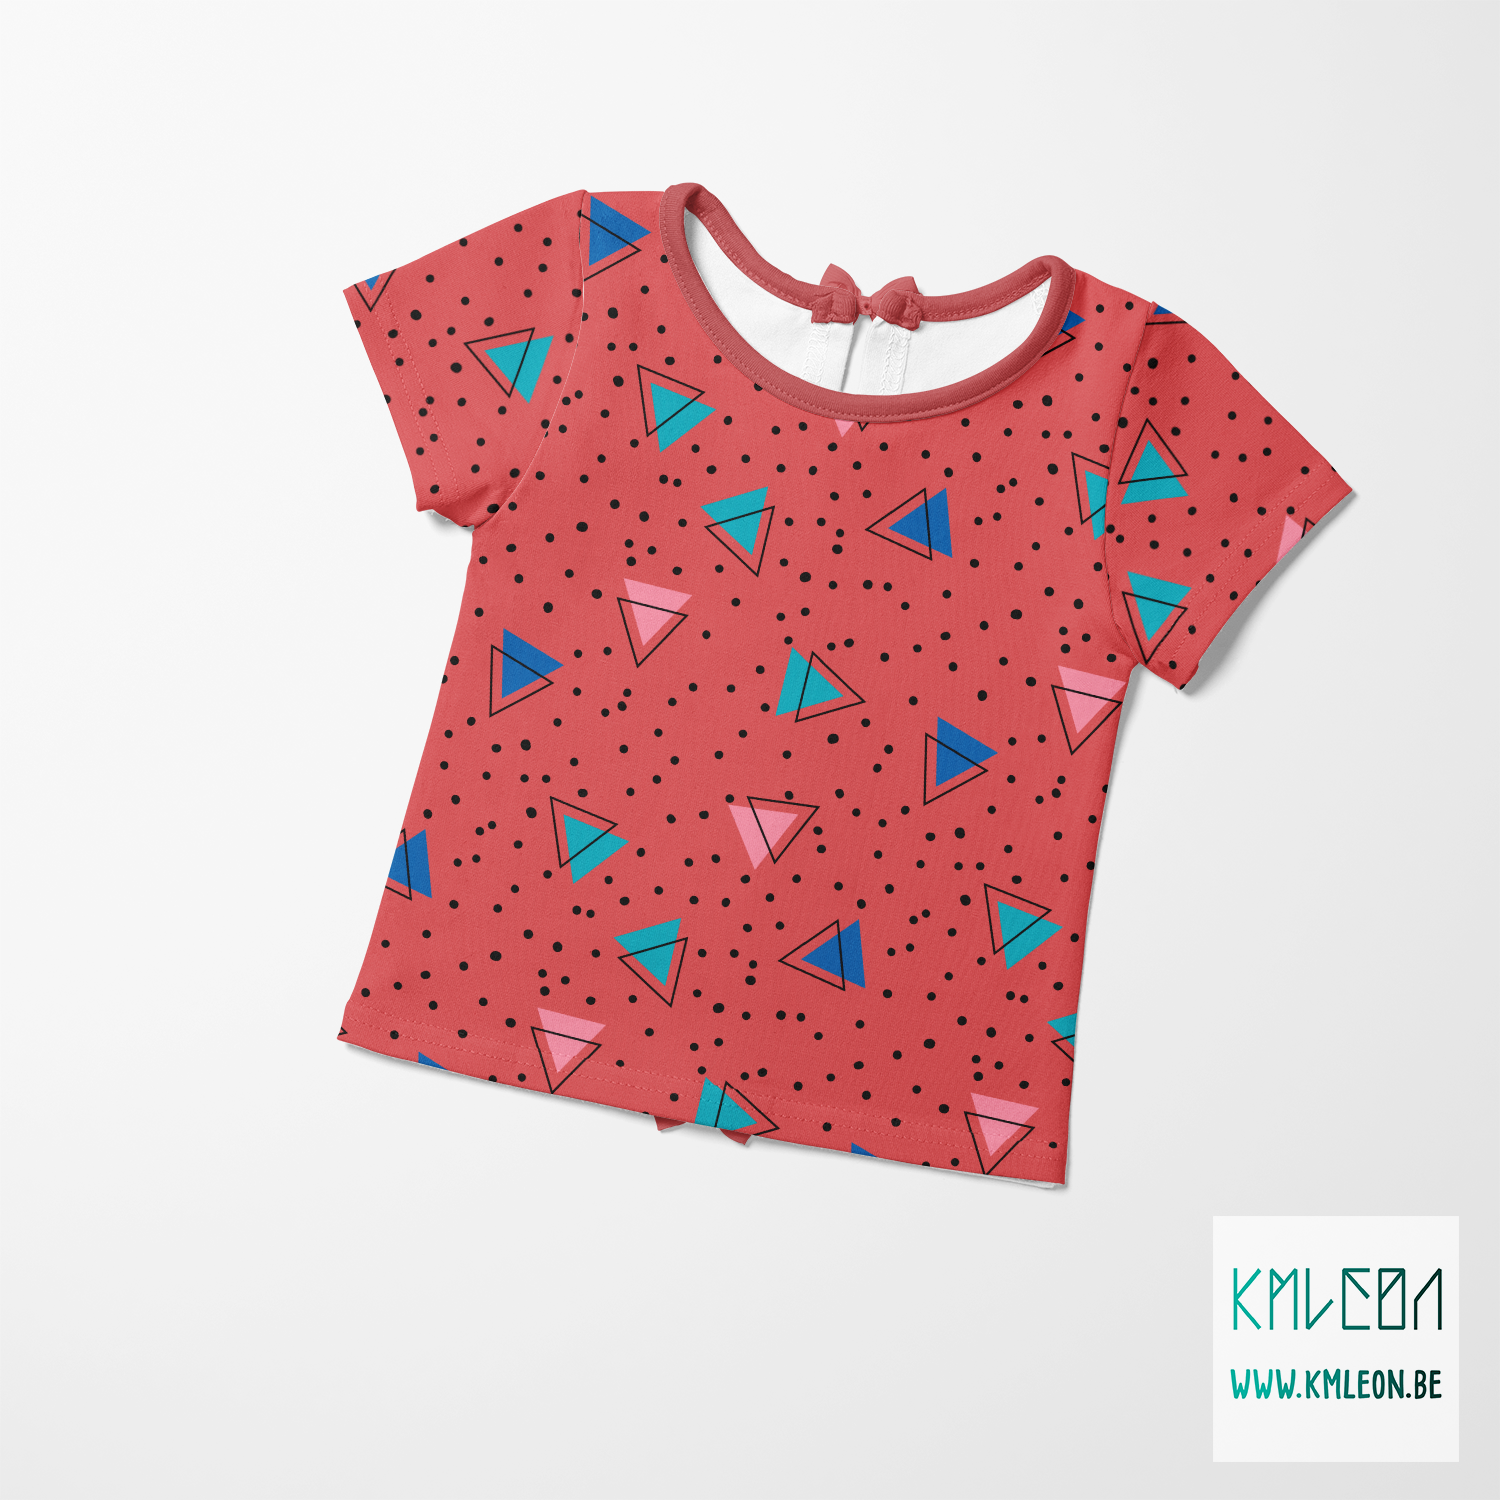 Teal, blue, pink and black triangles and black dots fabric